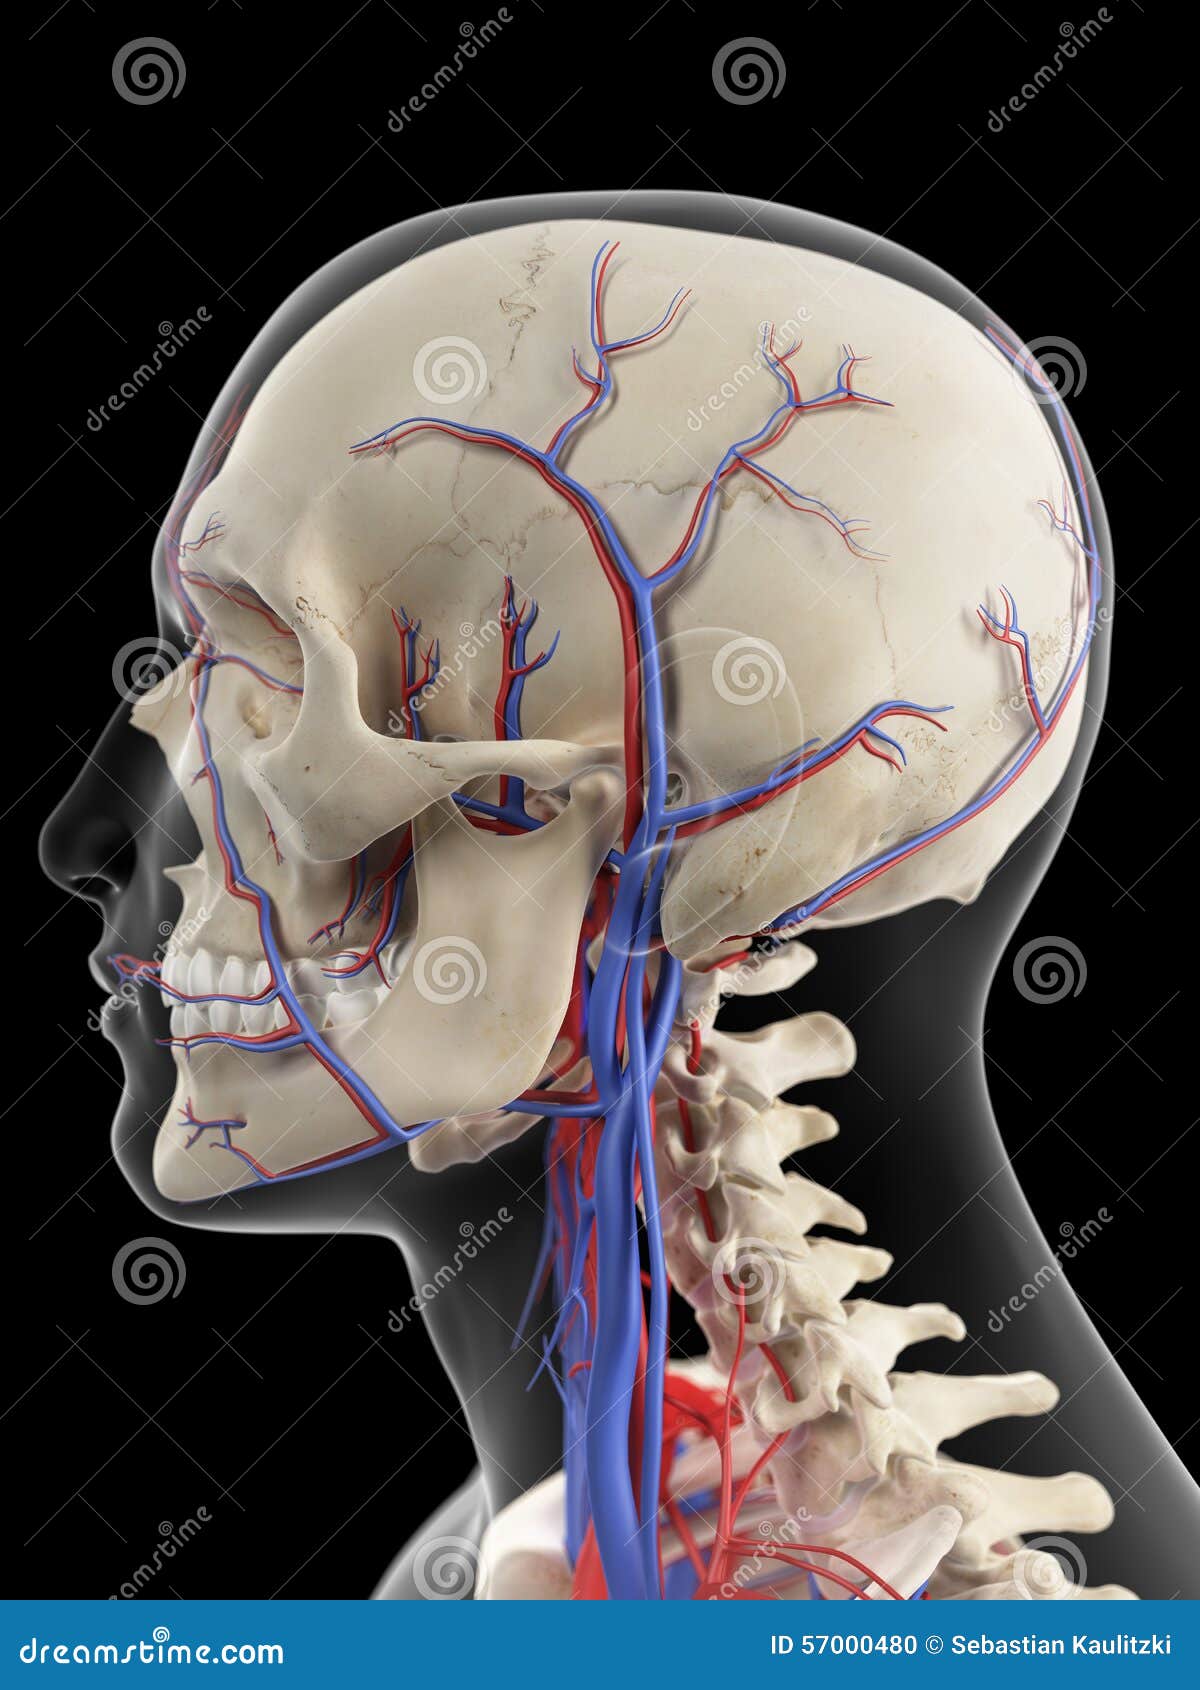 veins of the head and neck